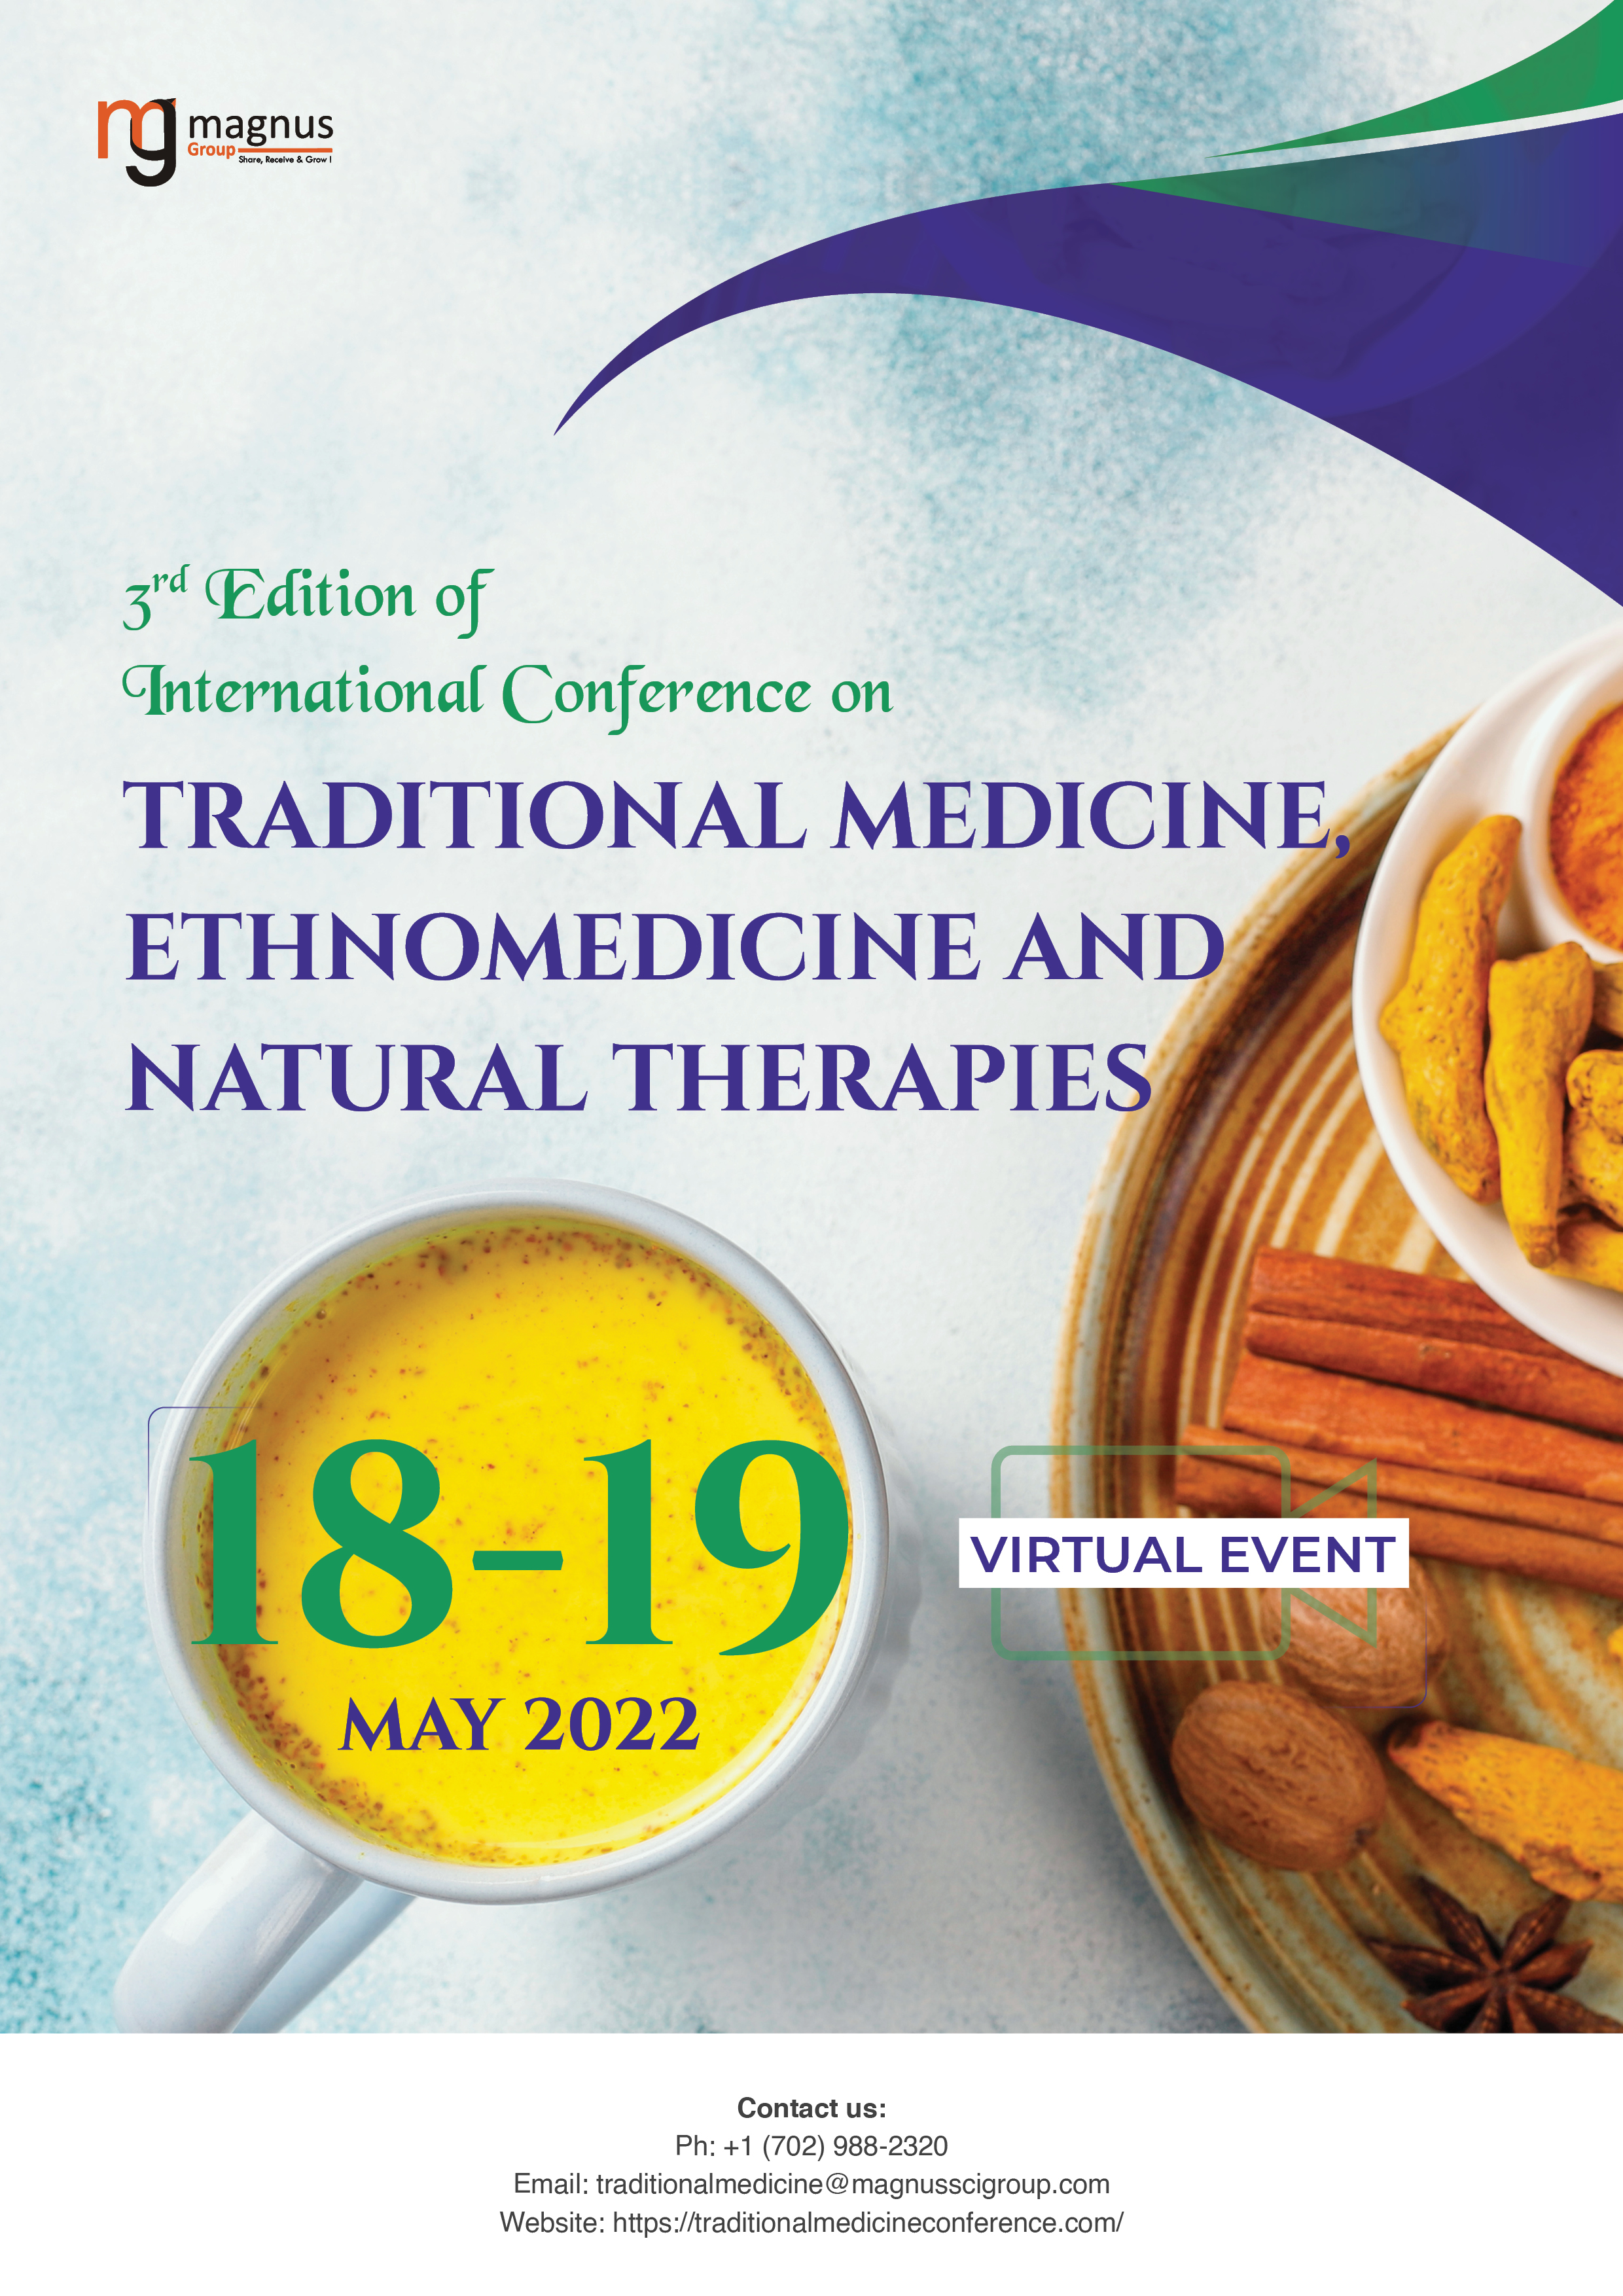 3rd Edition of International Conference on Traditional Medicine, Ethnomedicine and Natural Therapies | Online Event Book